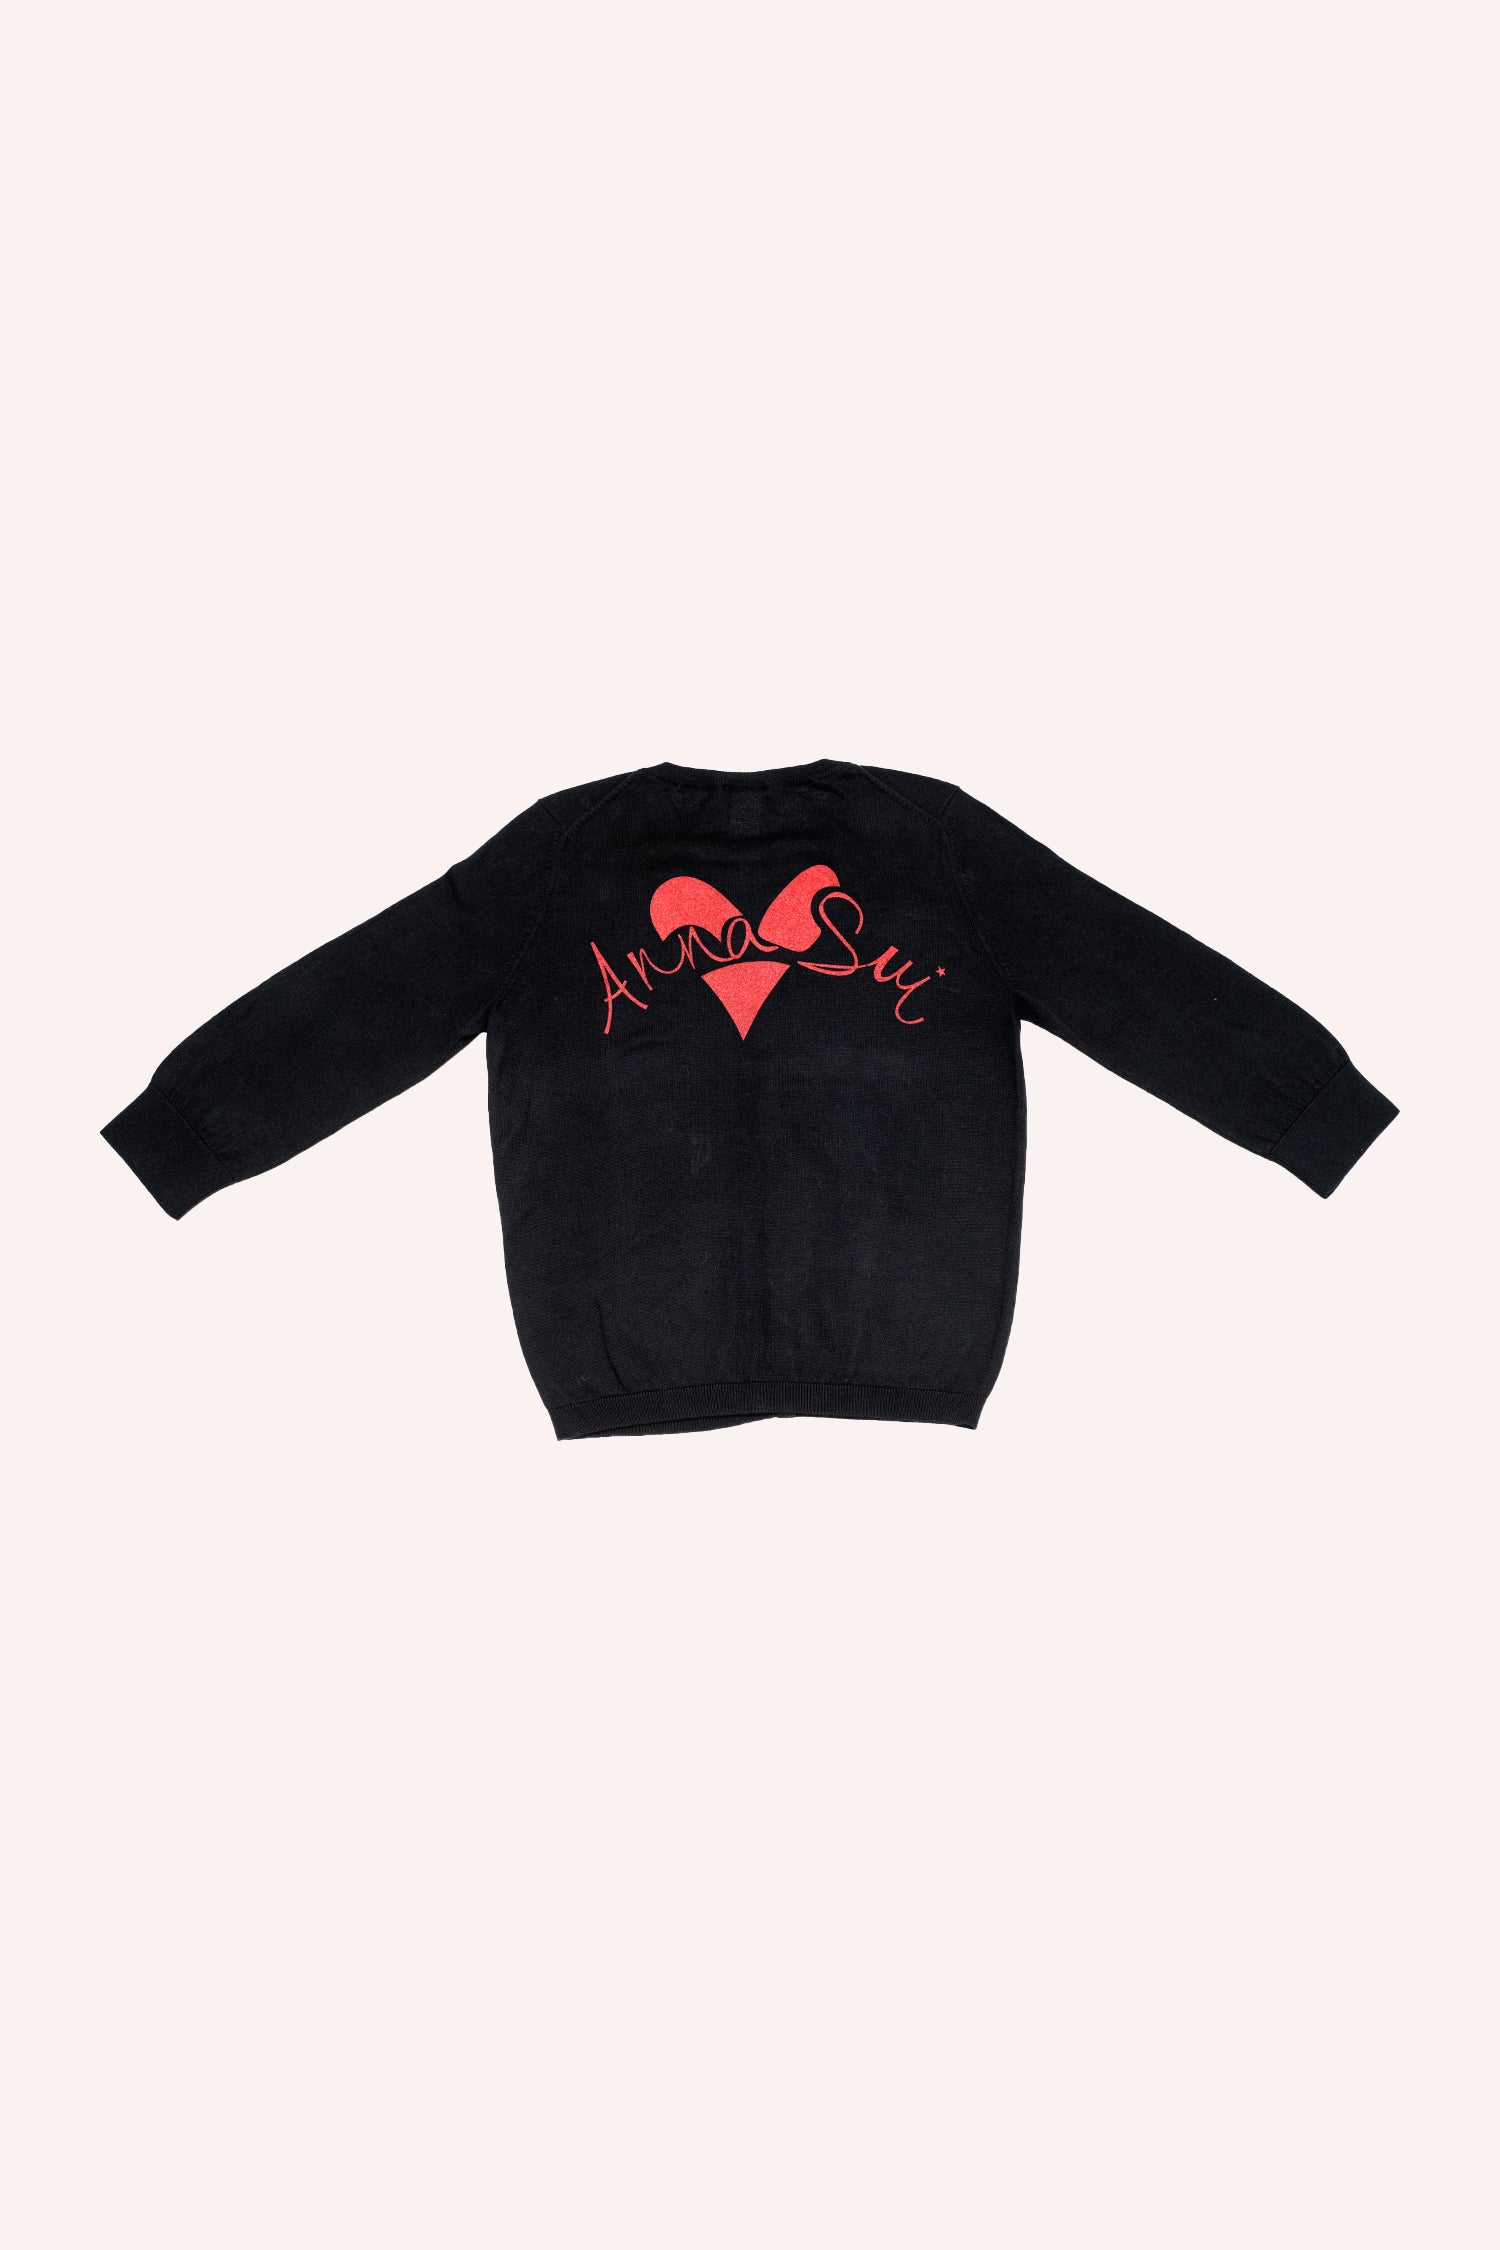 Three-quarter sleeve length Cardigan Black, large red Anna Sui over a red hart in middle of the back